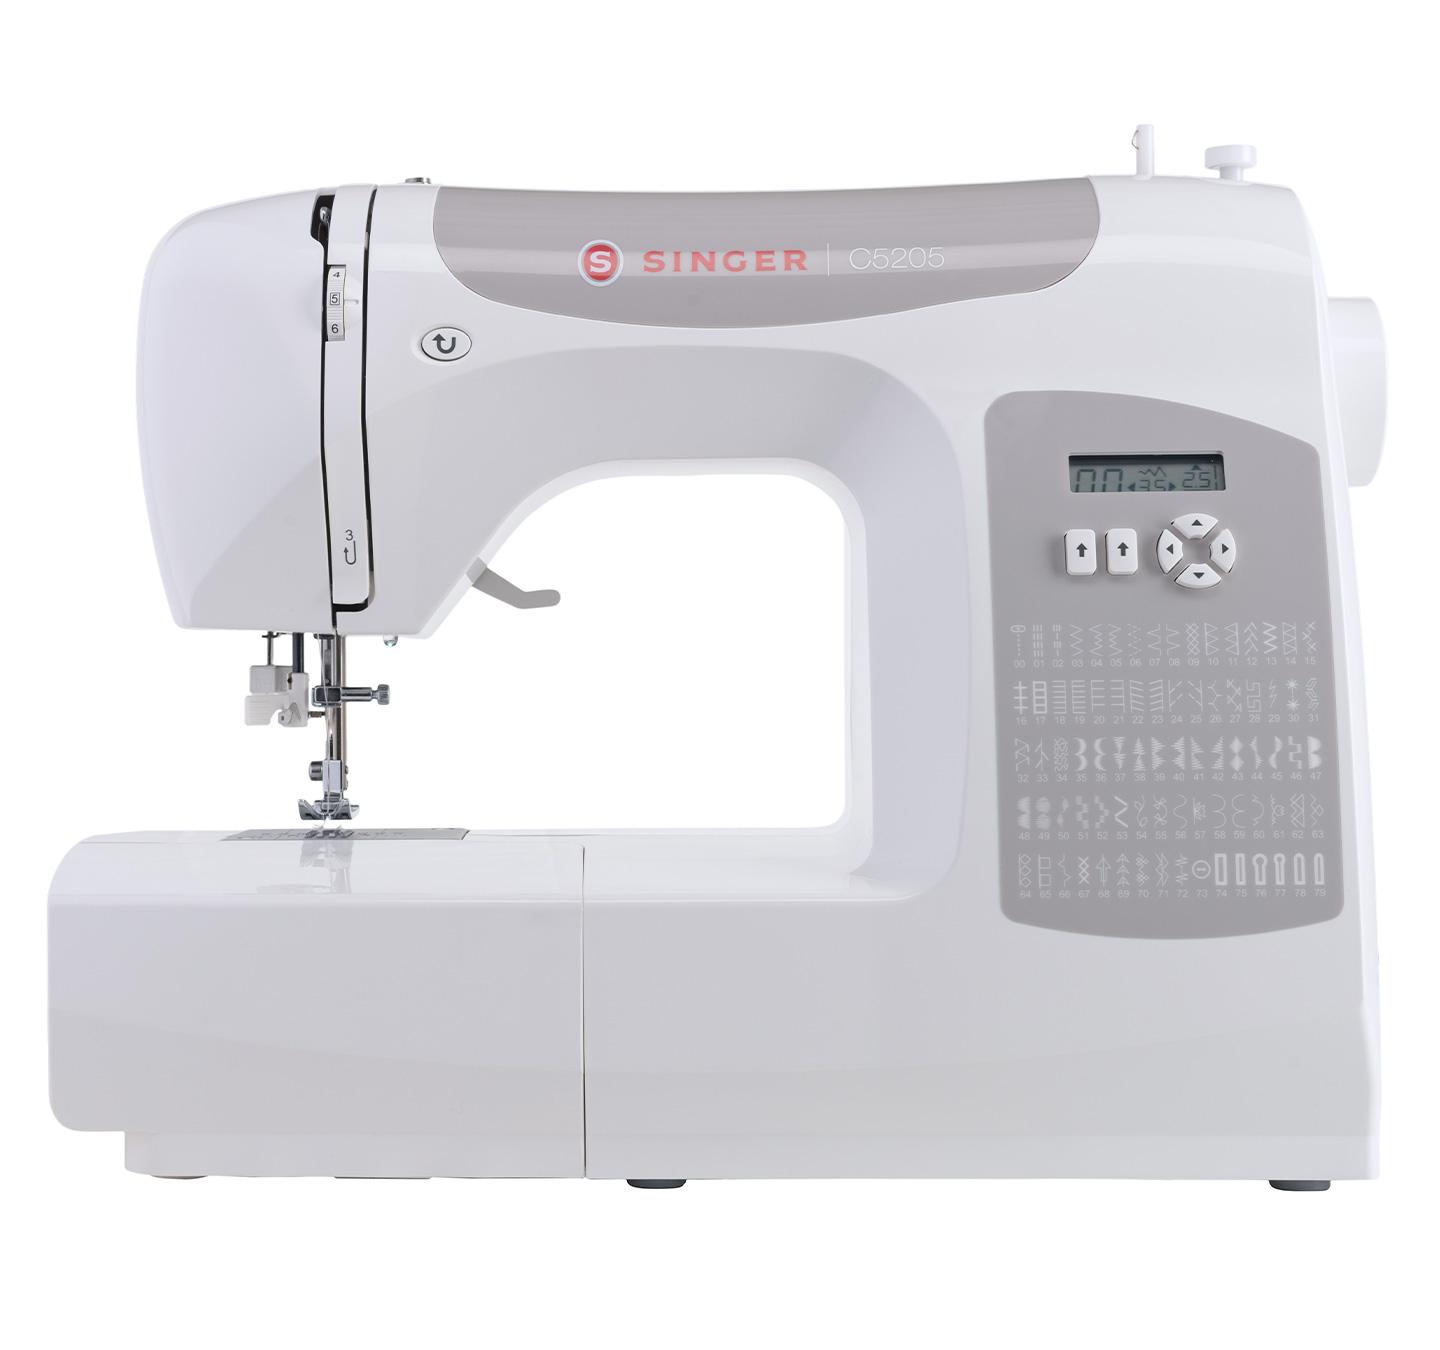 Product SINGER C5205-GR < Electronic < Household Sewing Machines - Singer Sewing Machine image